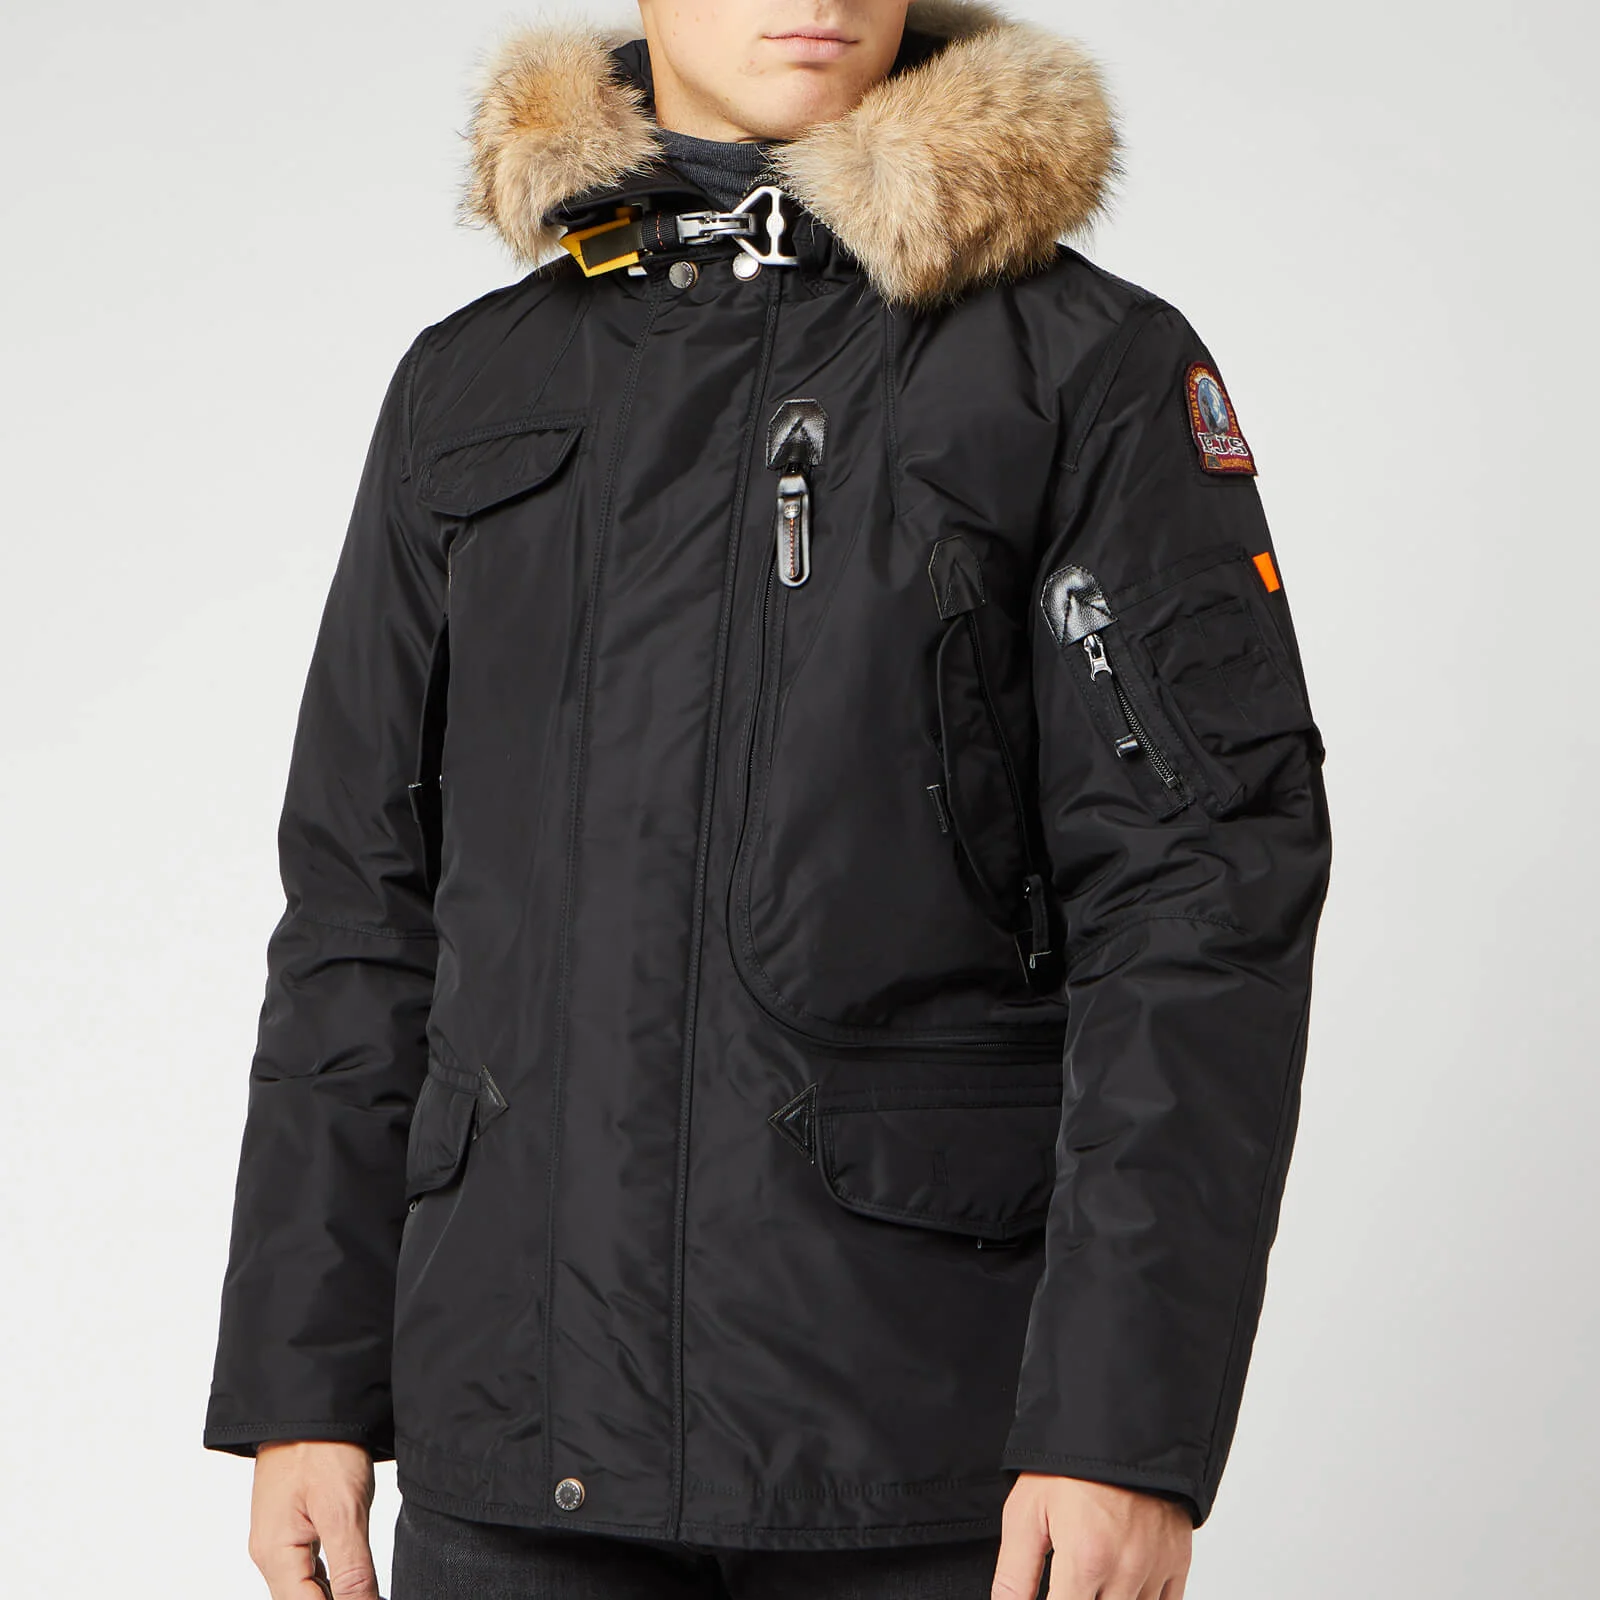 Parajumpers Men's Right Hand Jacket - Black Image 1